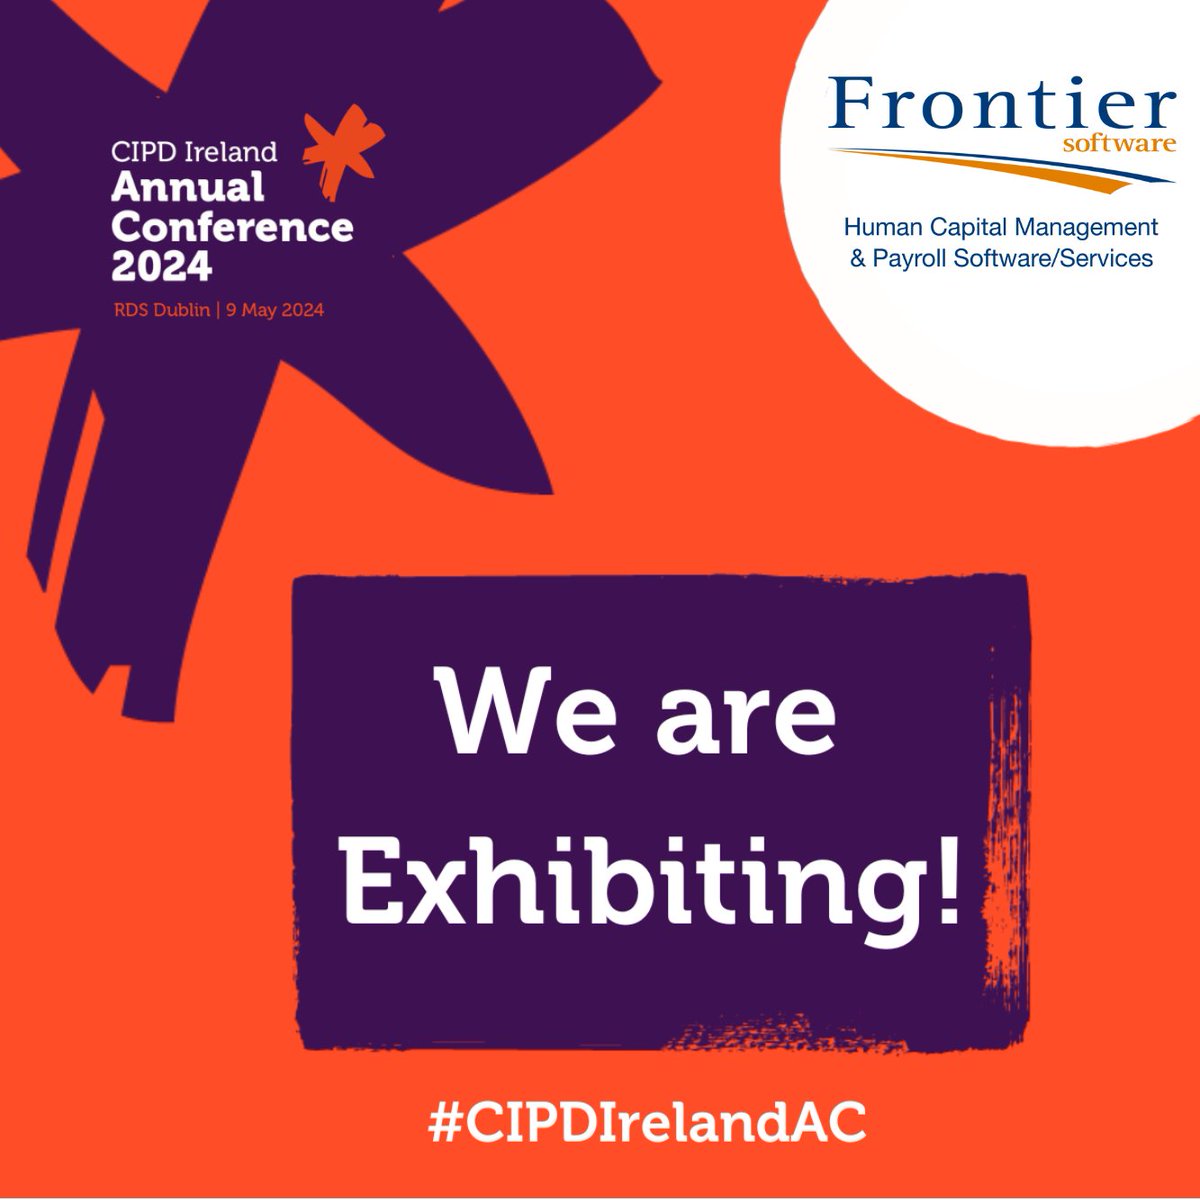 Just 1 day till @CIPDIreland Annual Conference 2024! Join the HR community and meet Frontier Software at the @TheRDS. Book your tickets here bit.ly/4dxDb0M.
#CIPDIreland #CIPDIrelandAC #frontiersoftware #hr #conference #events #network #learn #hrsoftware #payrollsoftware